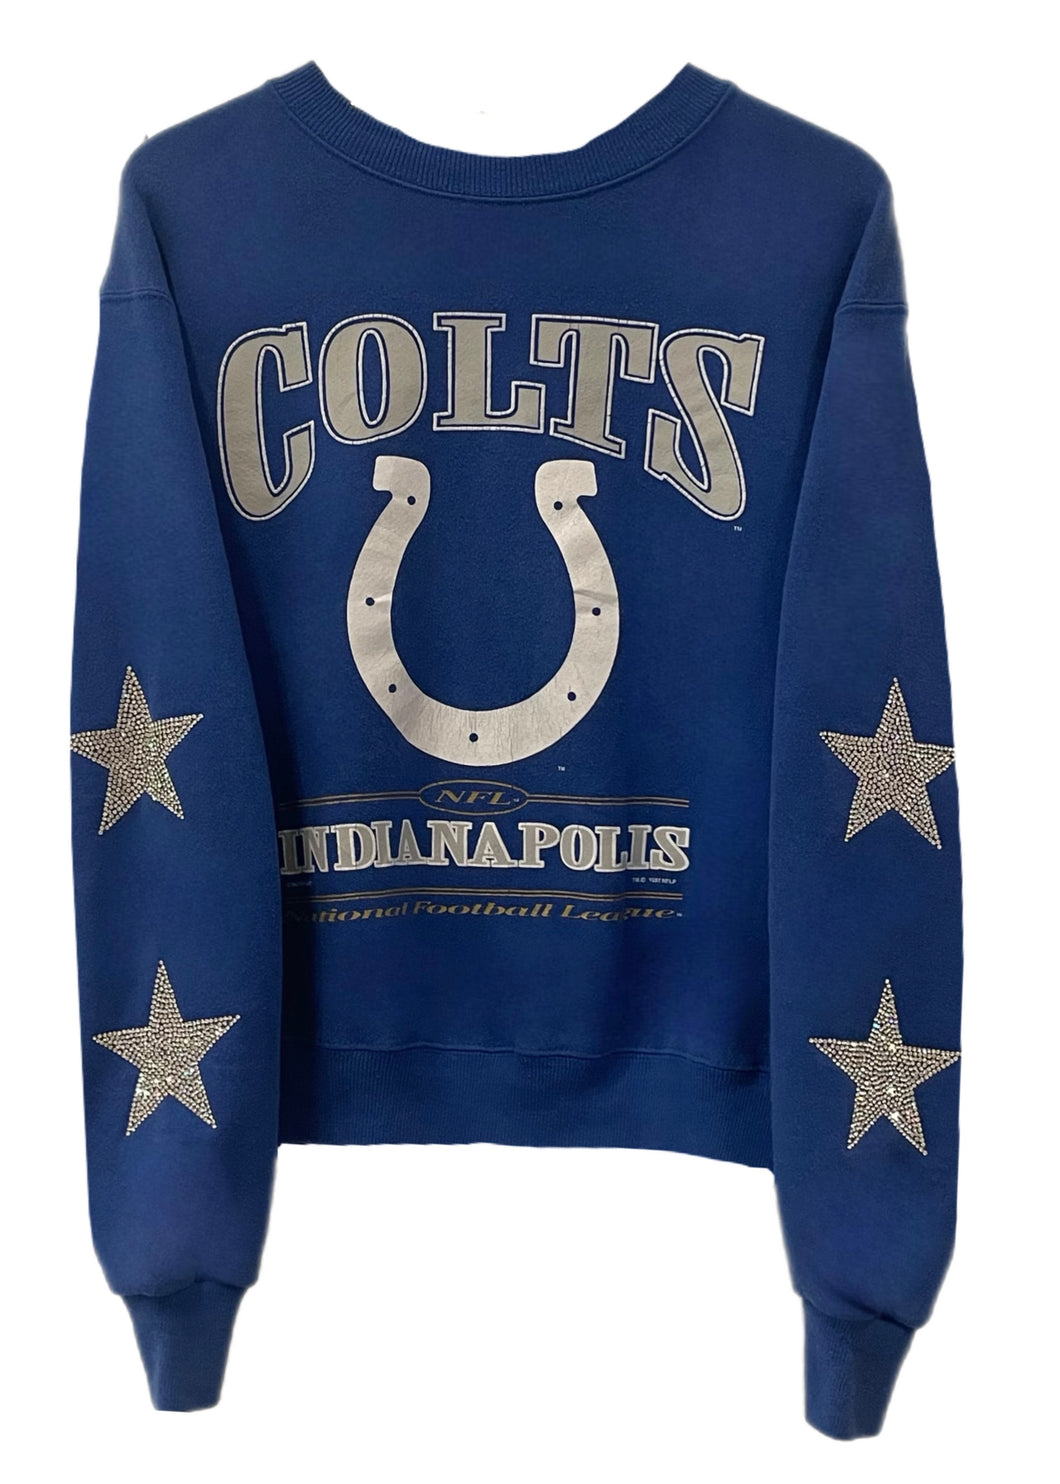 Indianapolis Colts, NFL One of a KIND Vintage Sweatshirt with Crystal Star Design